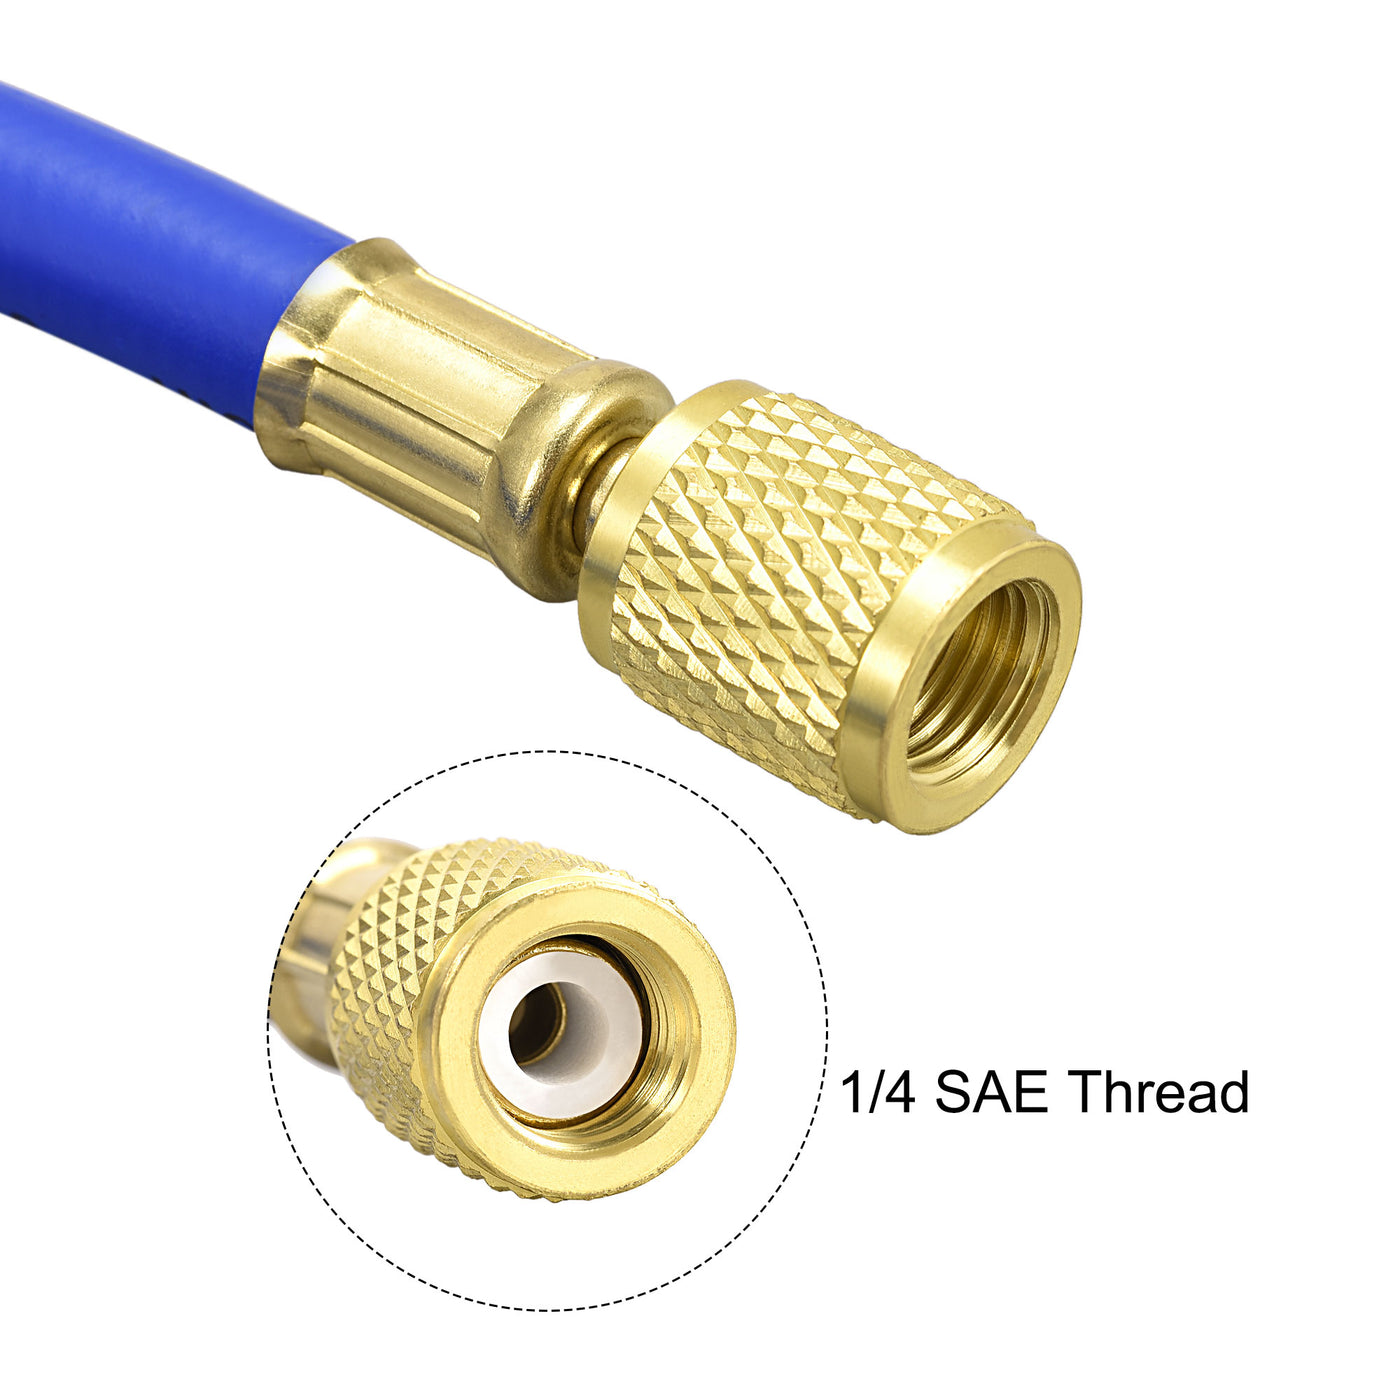 uxcell Uxcell Refrigerant Charging Hose, Threaded Brass Connector, for Automotive or Home HVAC Air Conditioner Refrigeration Maintenance